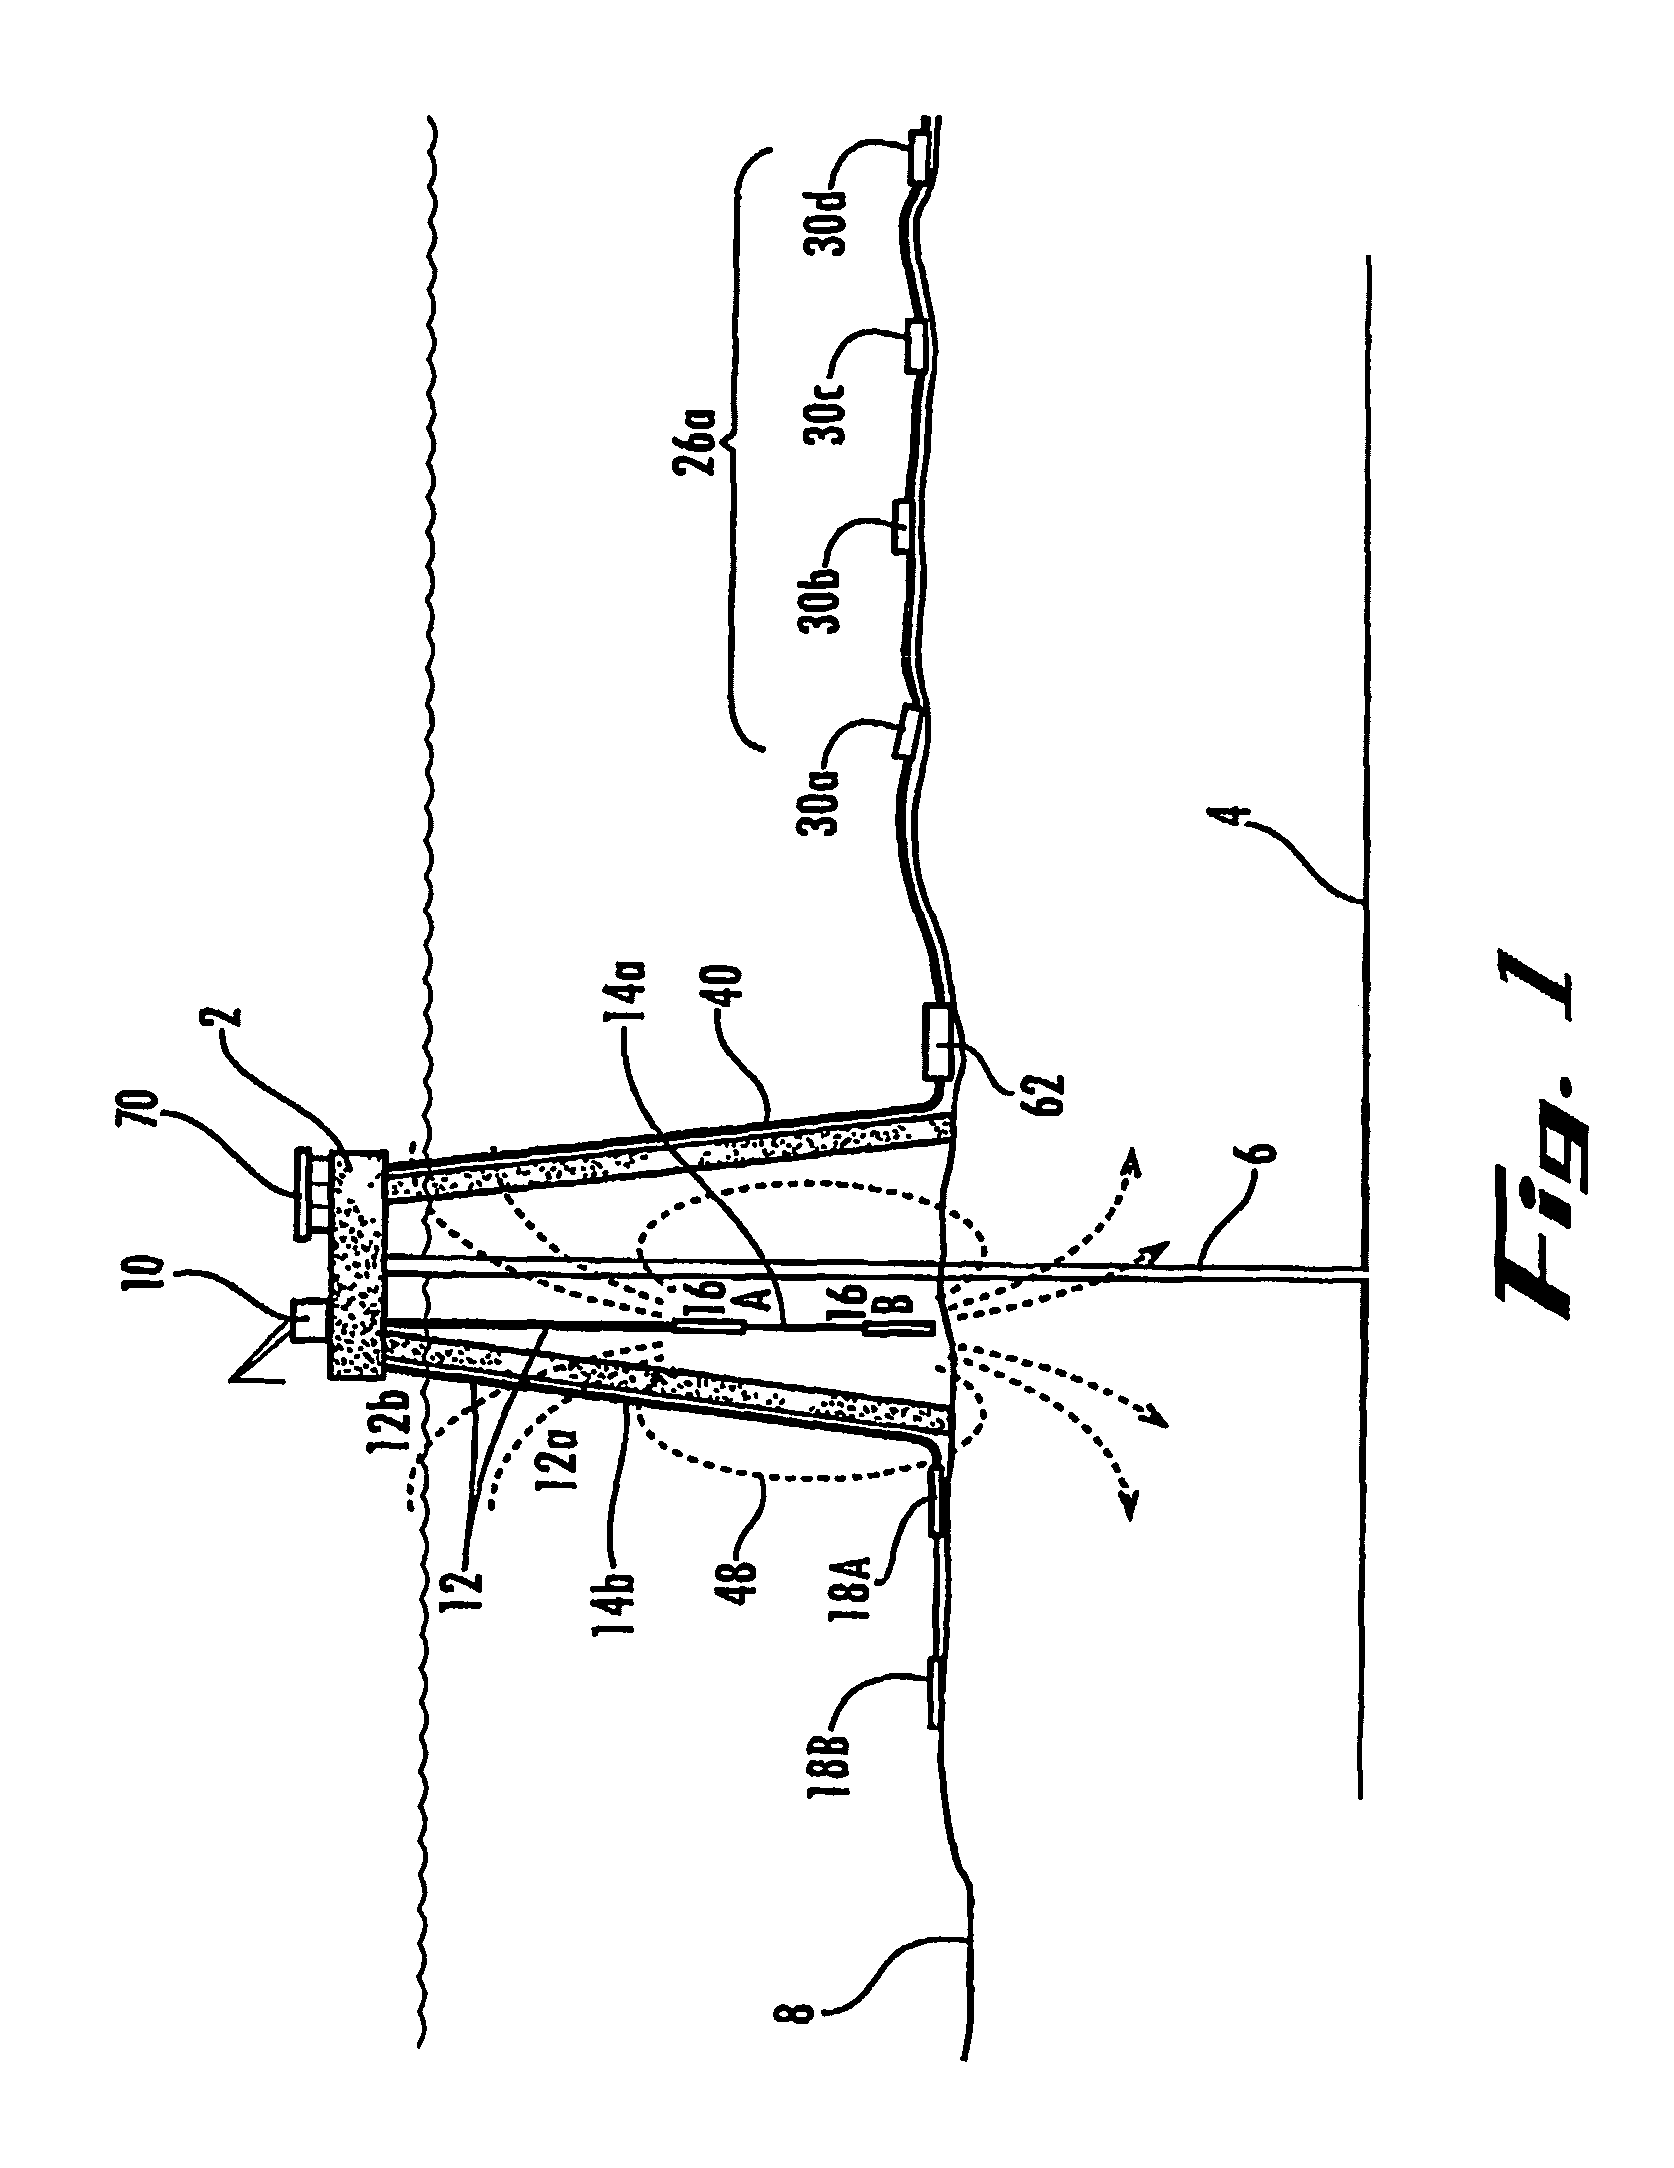 System and method for hydrocarbon reservoir monitoring using controlled-source electromagnetic fields